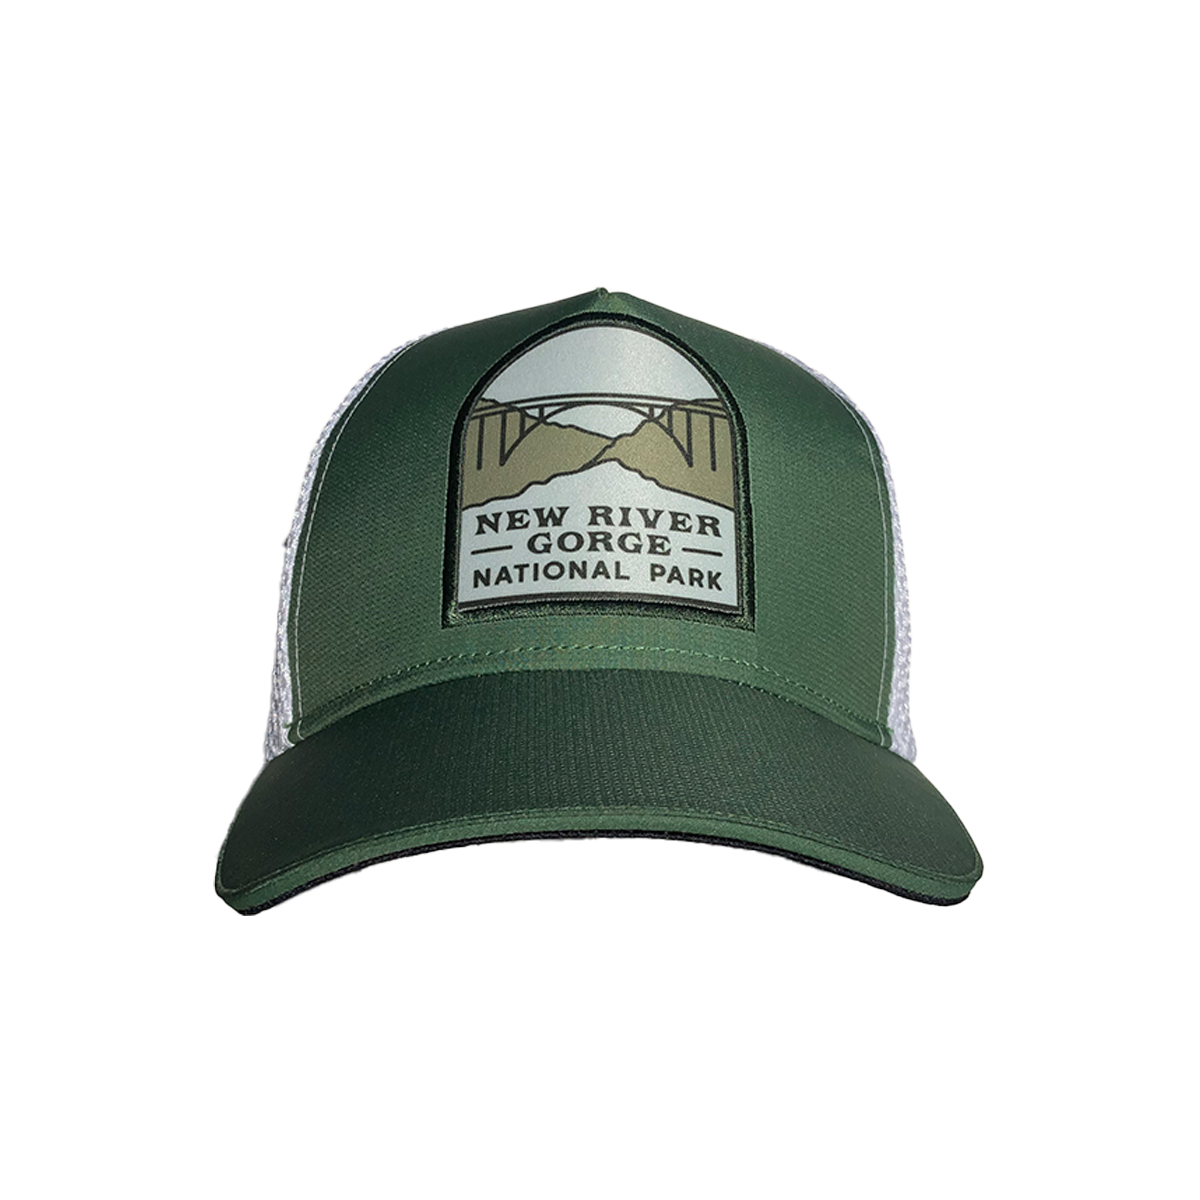 River Wyld - Trucker Hats, Clothing Store, Hats